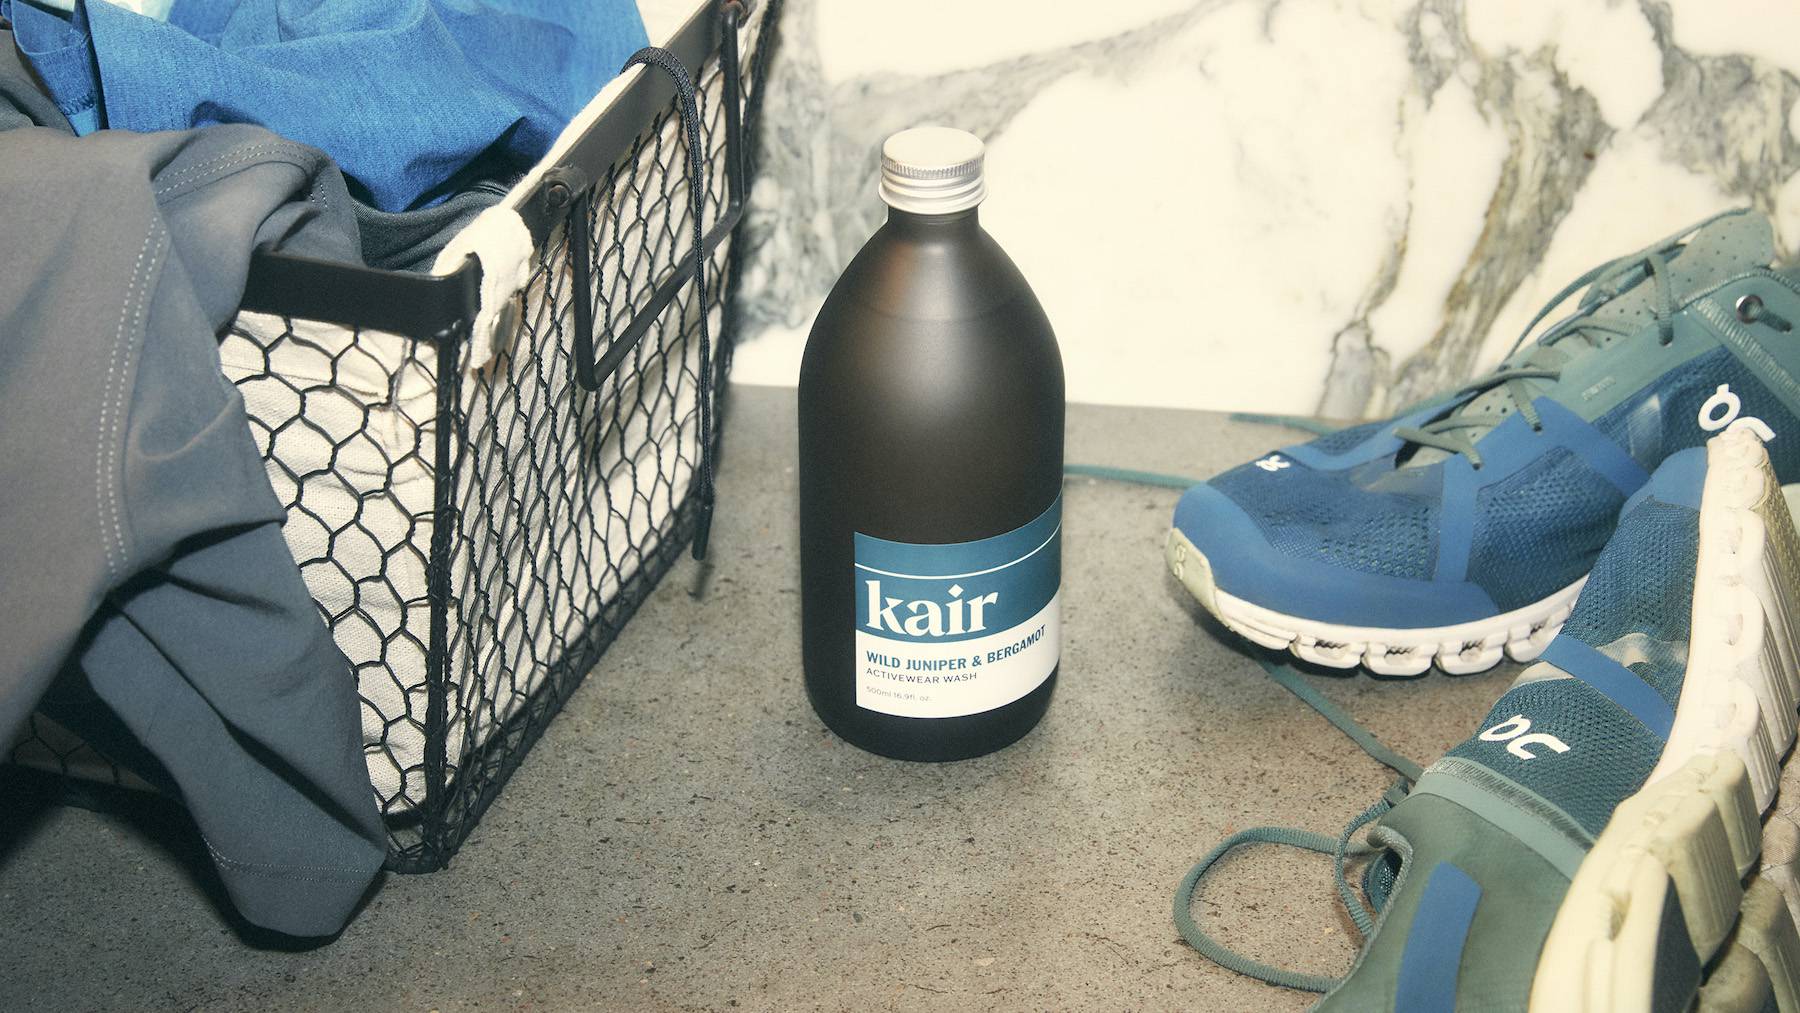 Kair is a new startup selling premium laundry detergents and freshening sprays. Courtesy.